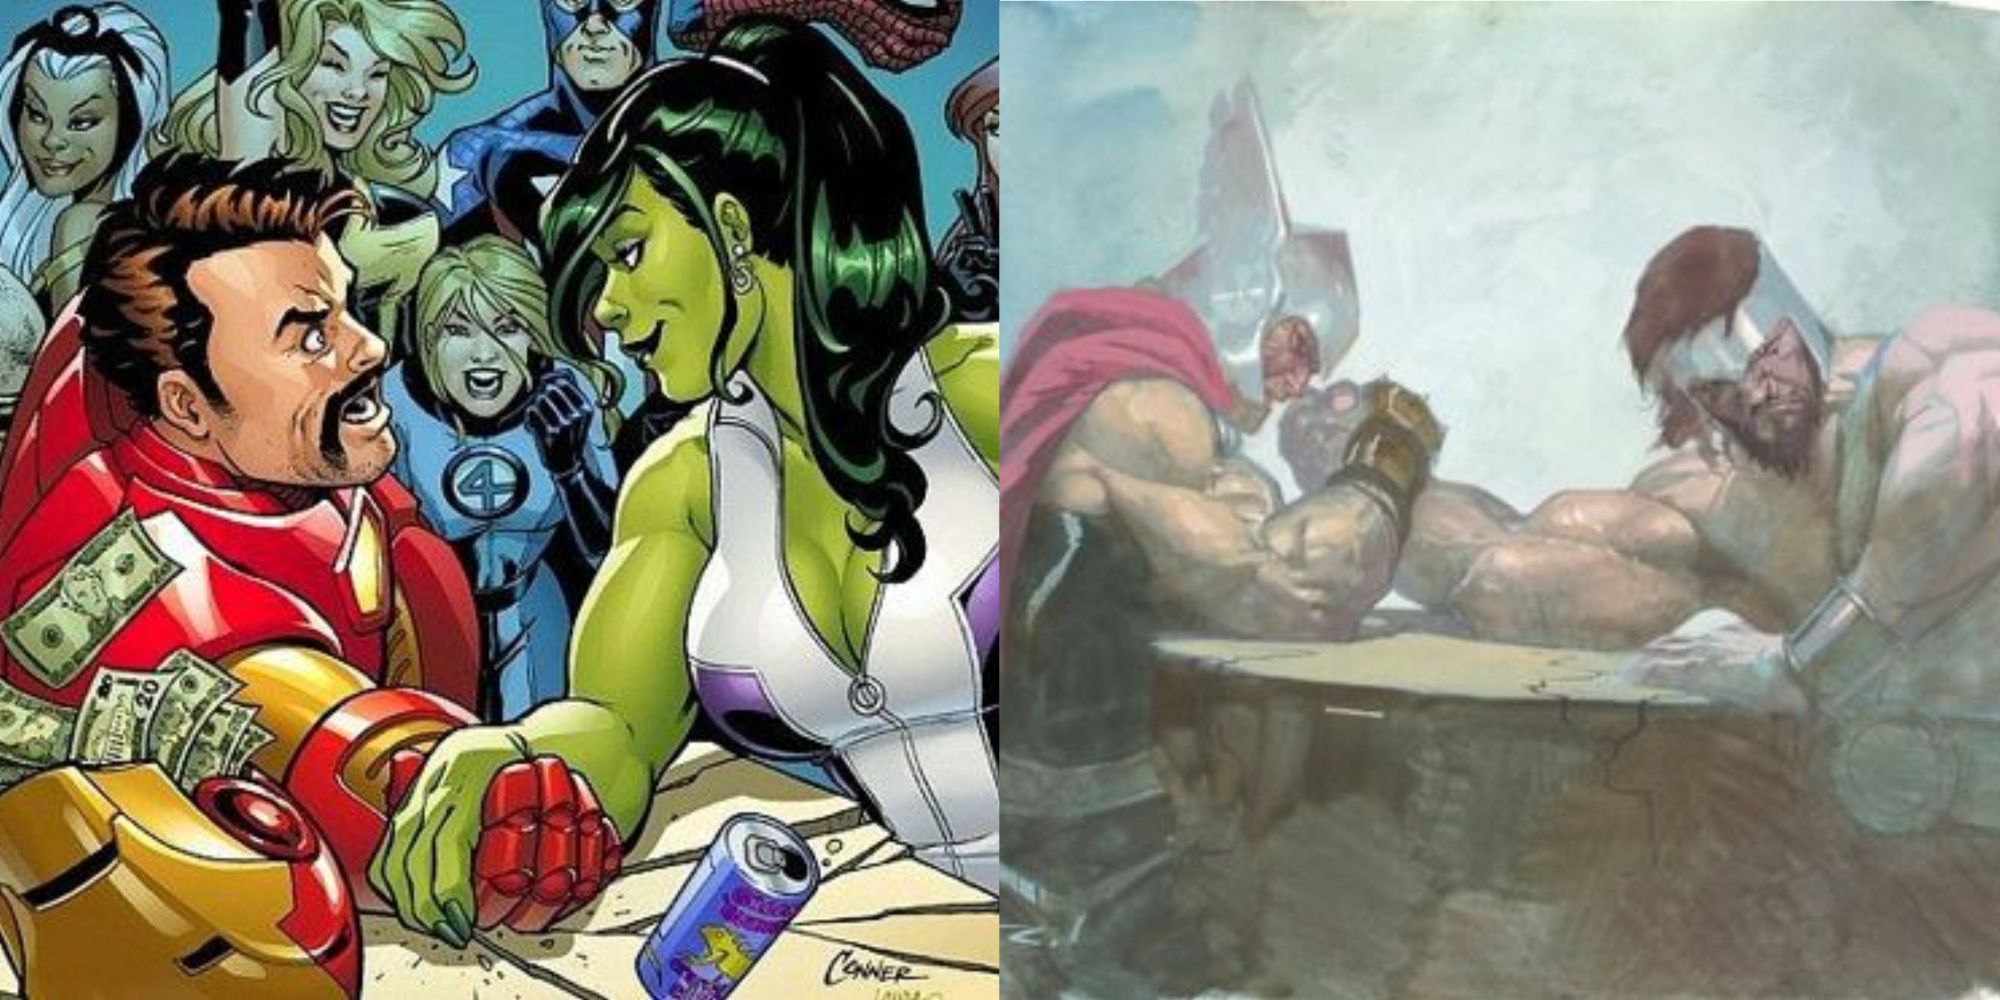 Left: She-Hulk beats Iron Man at arm wrestling while other heroes watch. Right: Esad Ribic's interpretation of Thor and Hercules arm wrestling